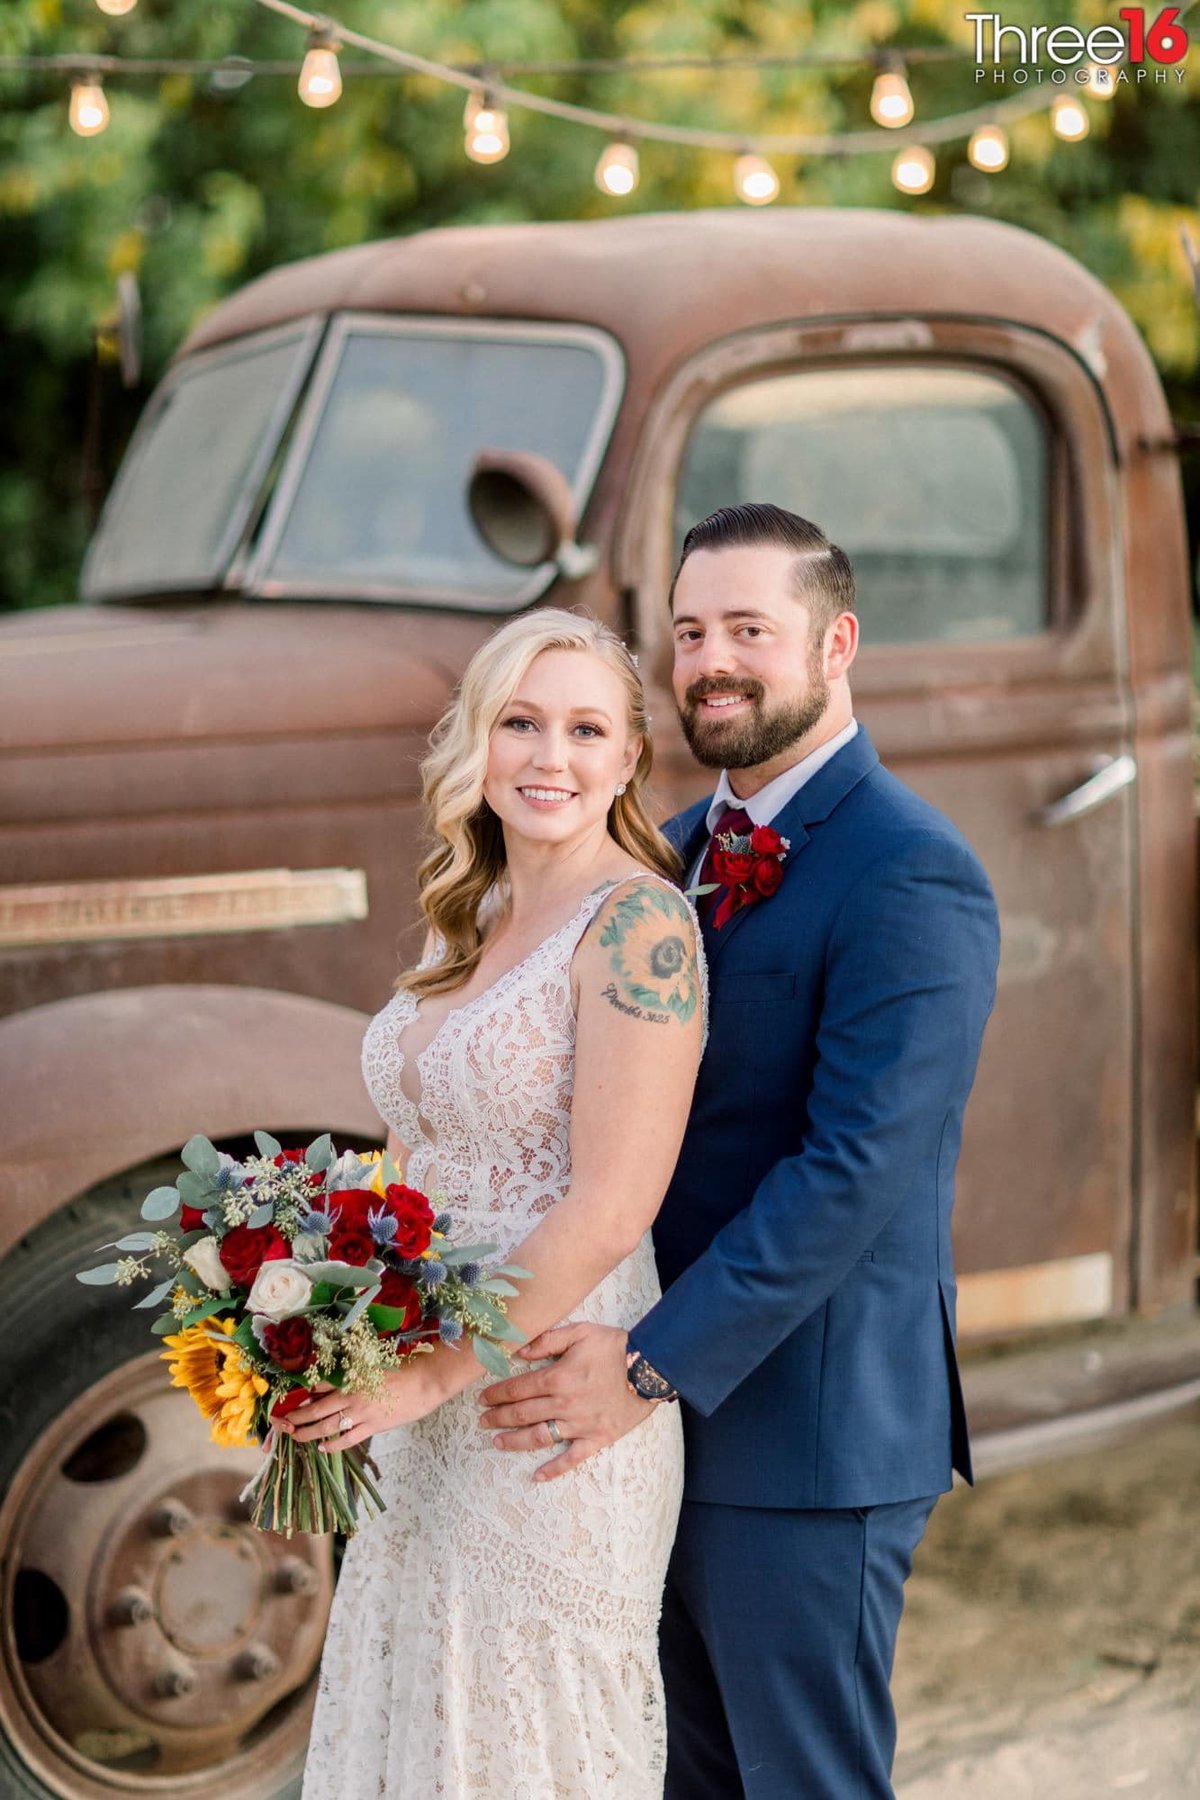 Groom holds his Bride's hips from behind as they pose in front of an old rustic-style truck behind them